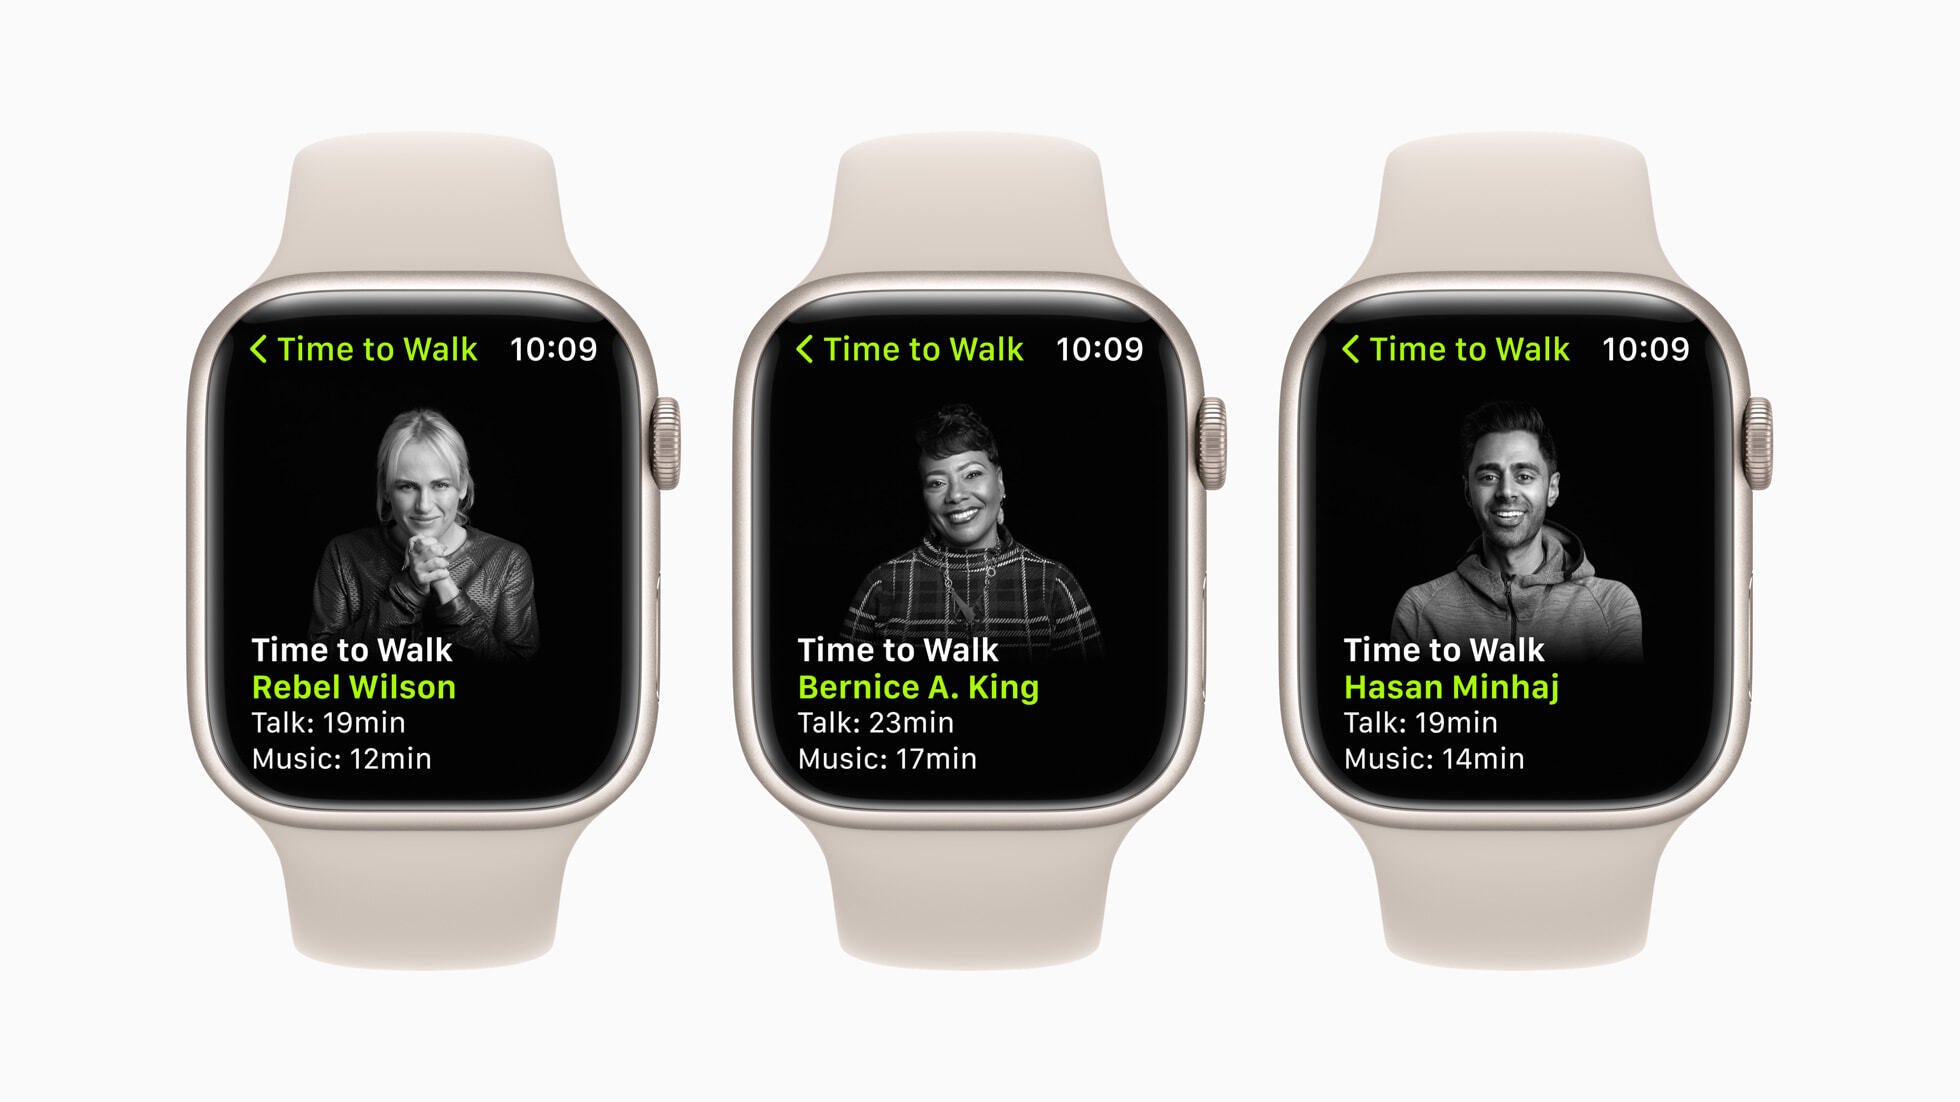 On January 10, Apple Fitness+ will introduce more new ways to inspire people